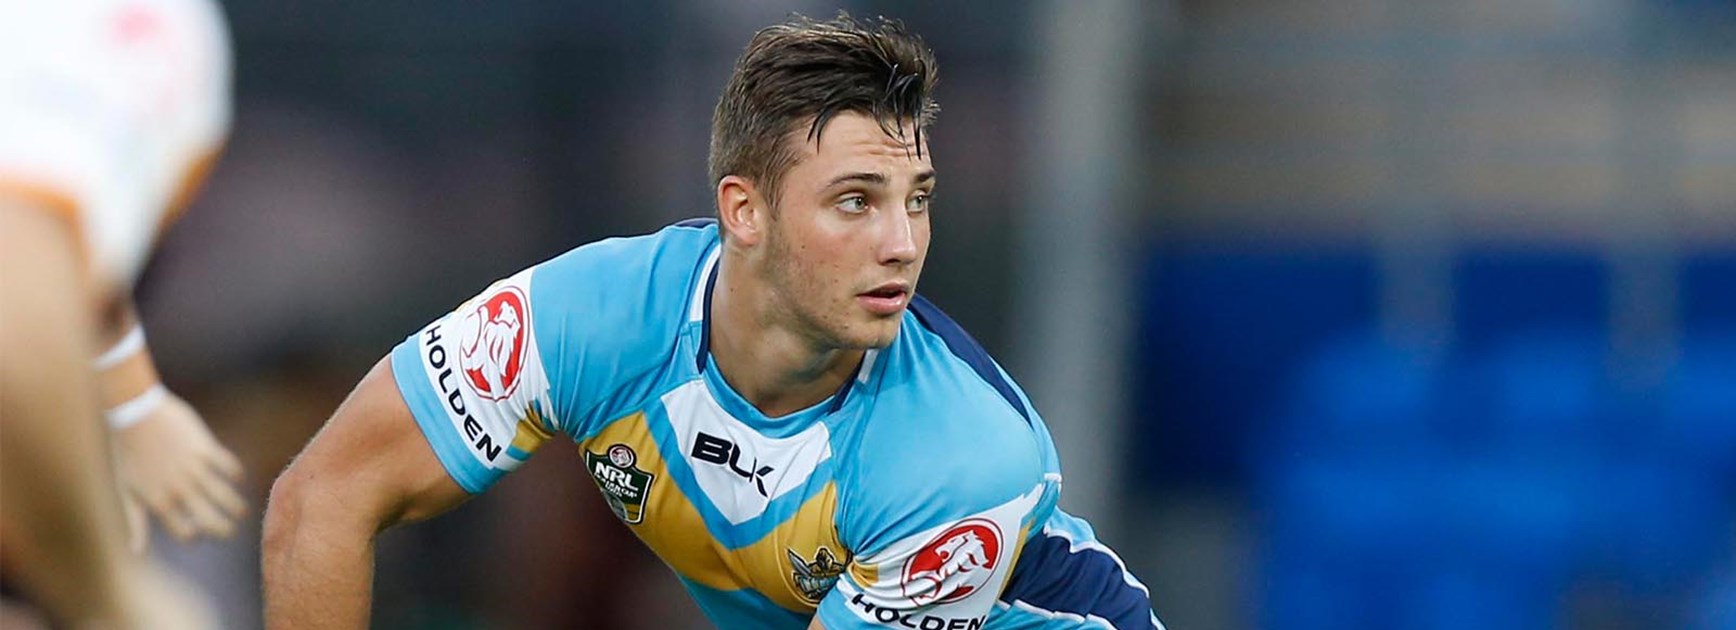 Karl Lawton will make history when he makes his NRL debut for the Titans.